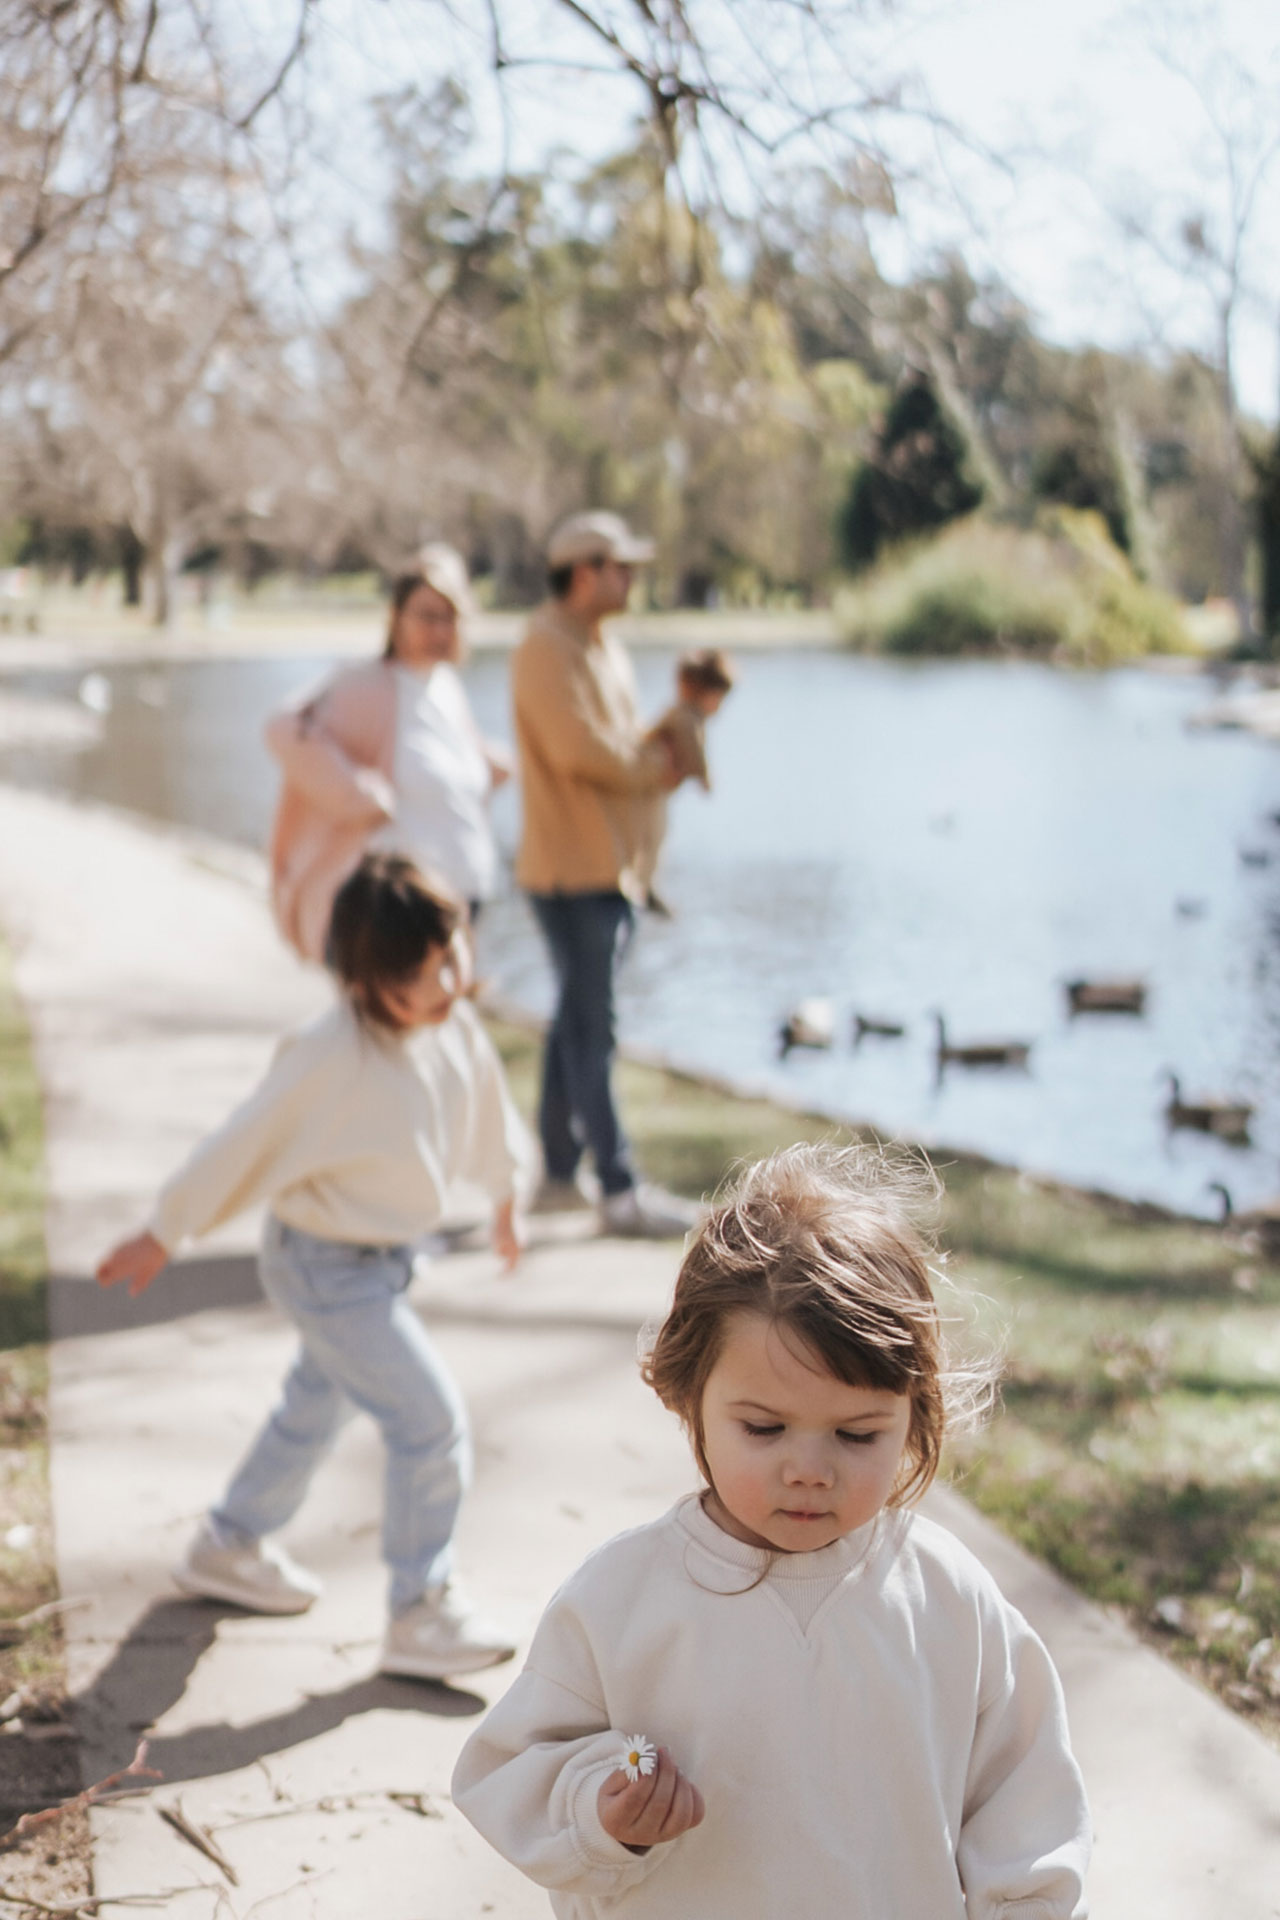 Photograph of Family at the Park Feeding Ducks at a Pond After Preset Application